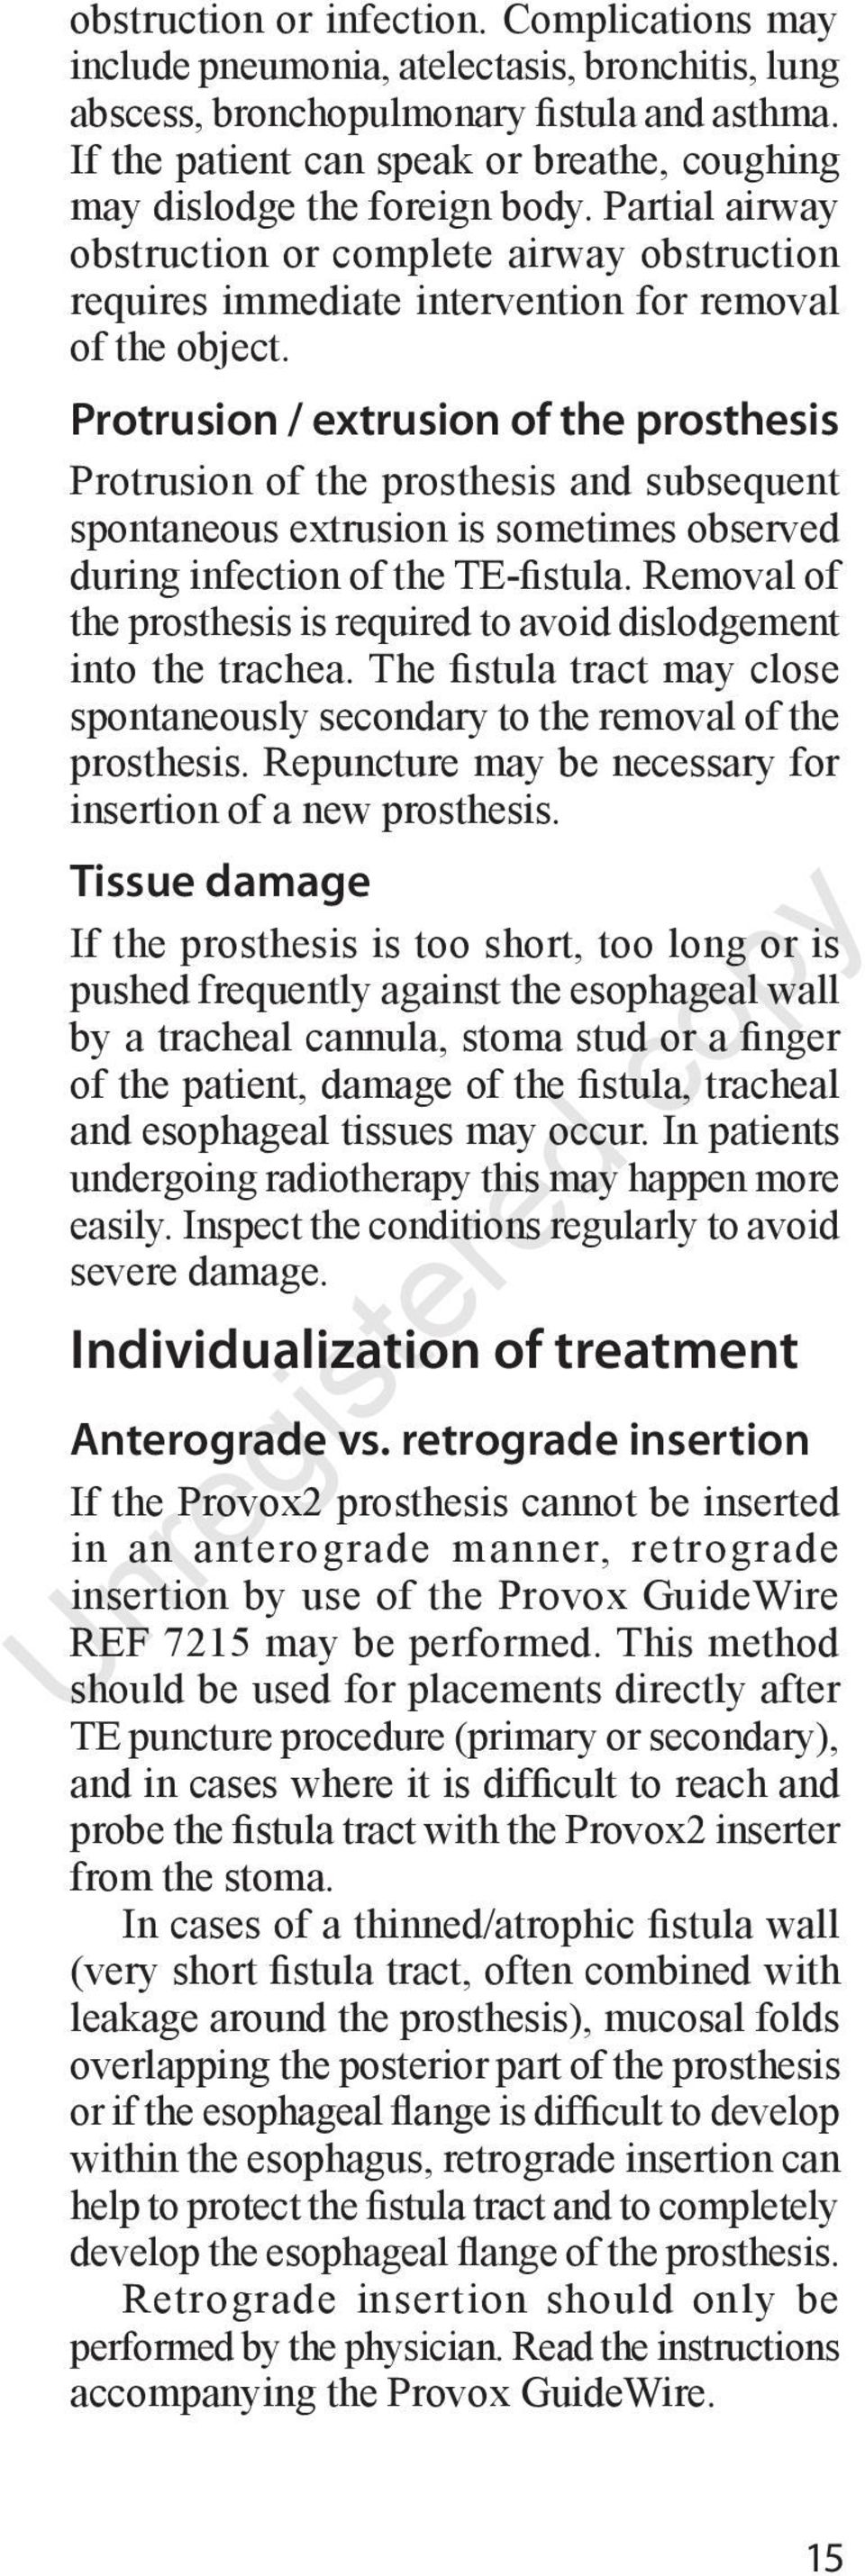 Protrusion / extrusion of the prosthesis Protrusion of the prosthesis and subsequent spontaneous extrusion is sometimes observed during infection of the TE-fistula.